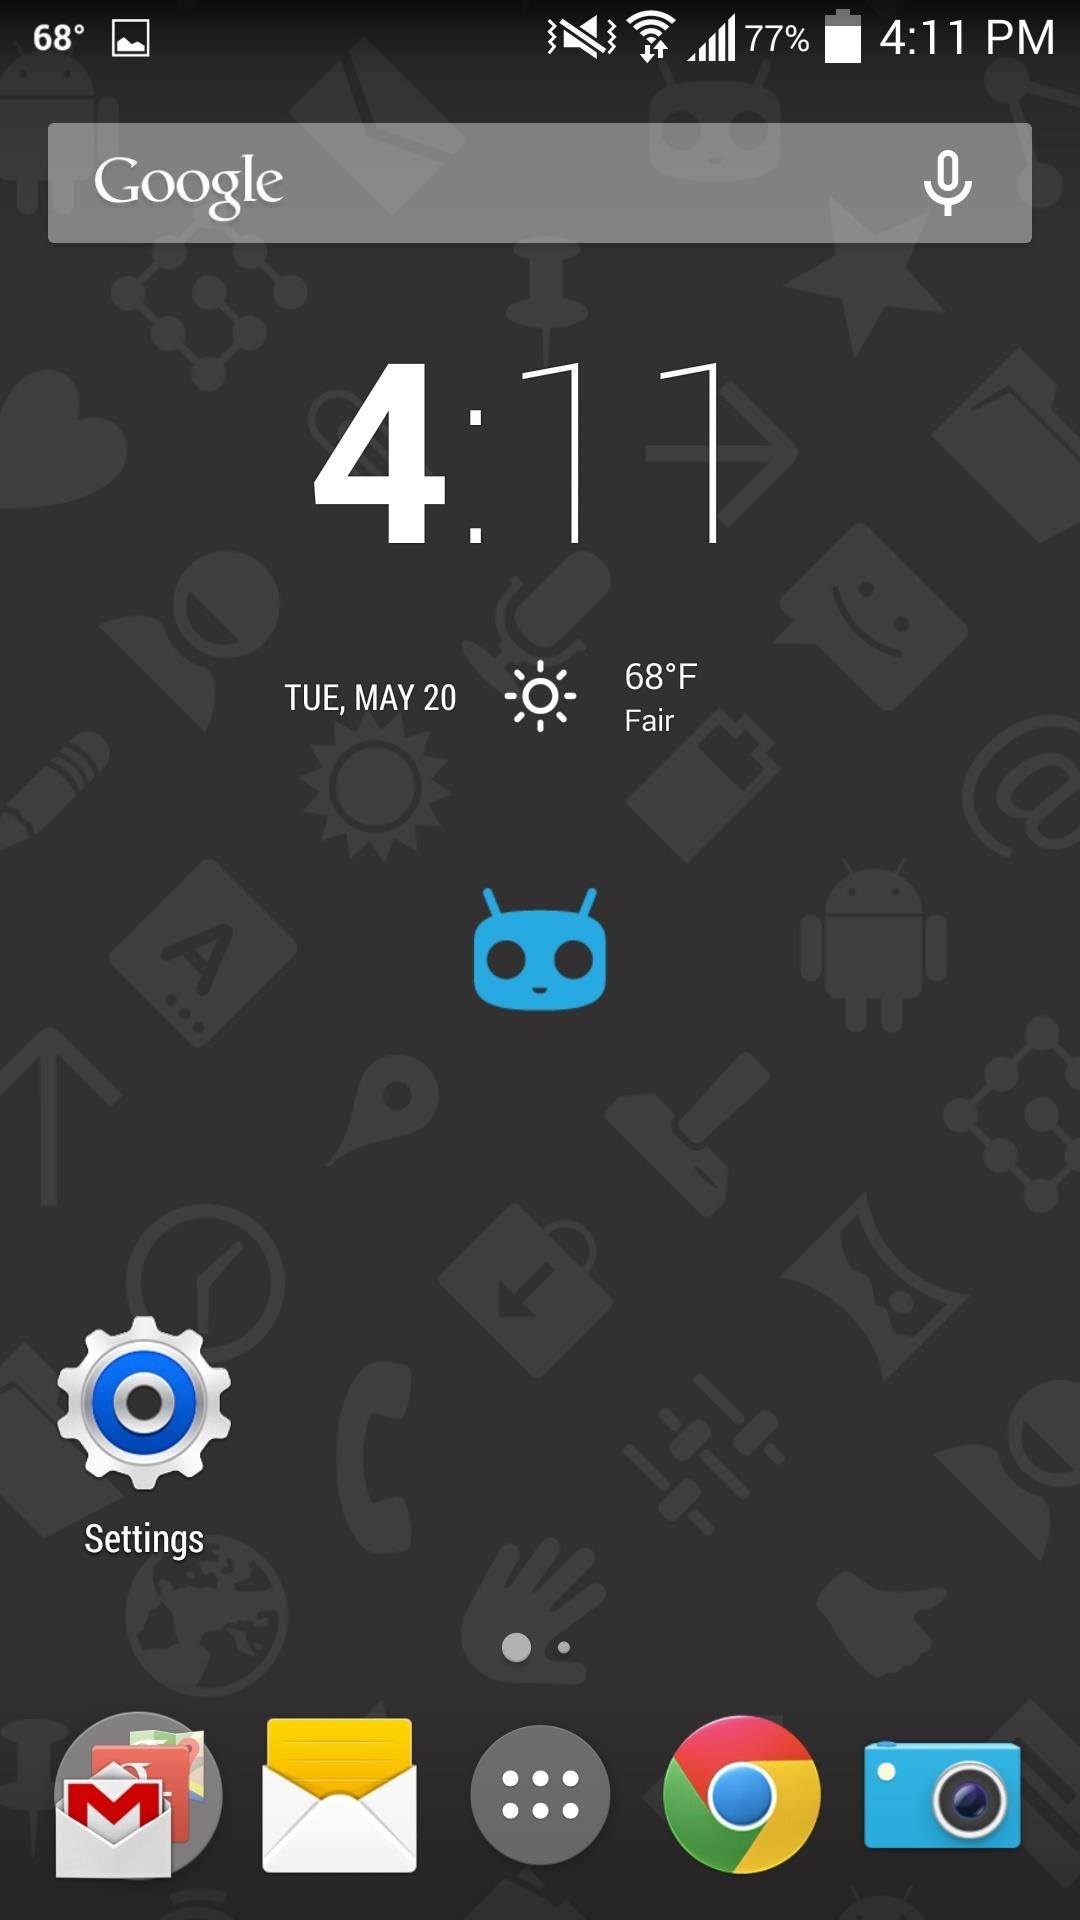 How to Get CyanogenMod Apps on Your Galaxy S4 Without Root